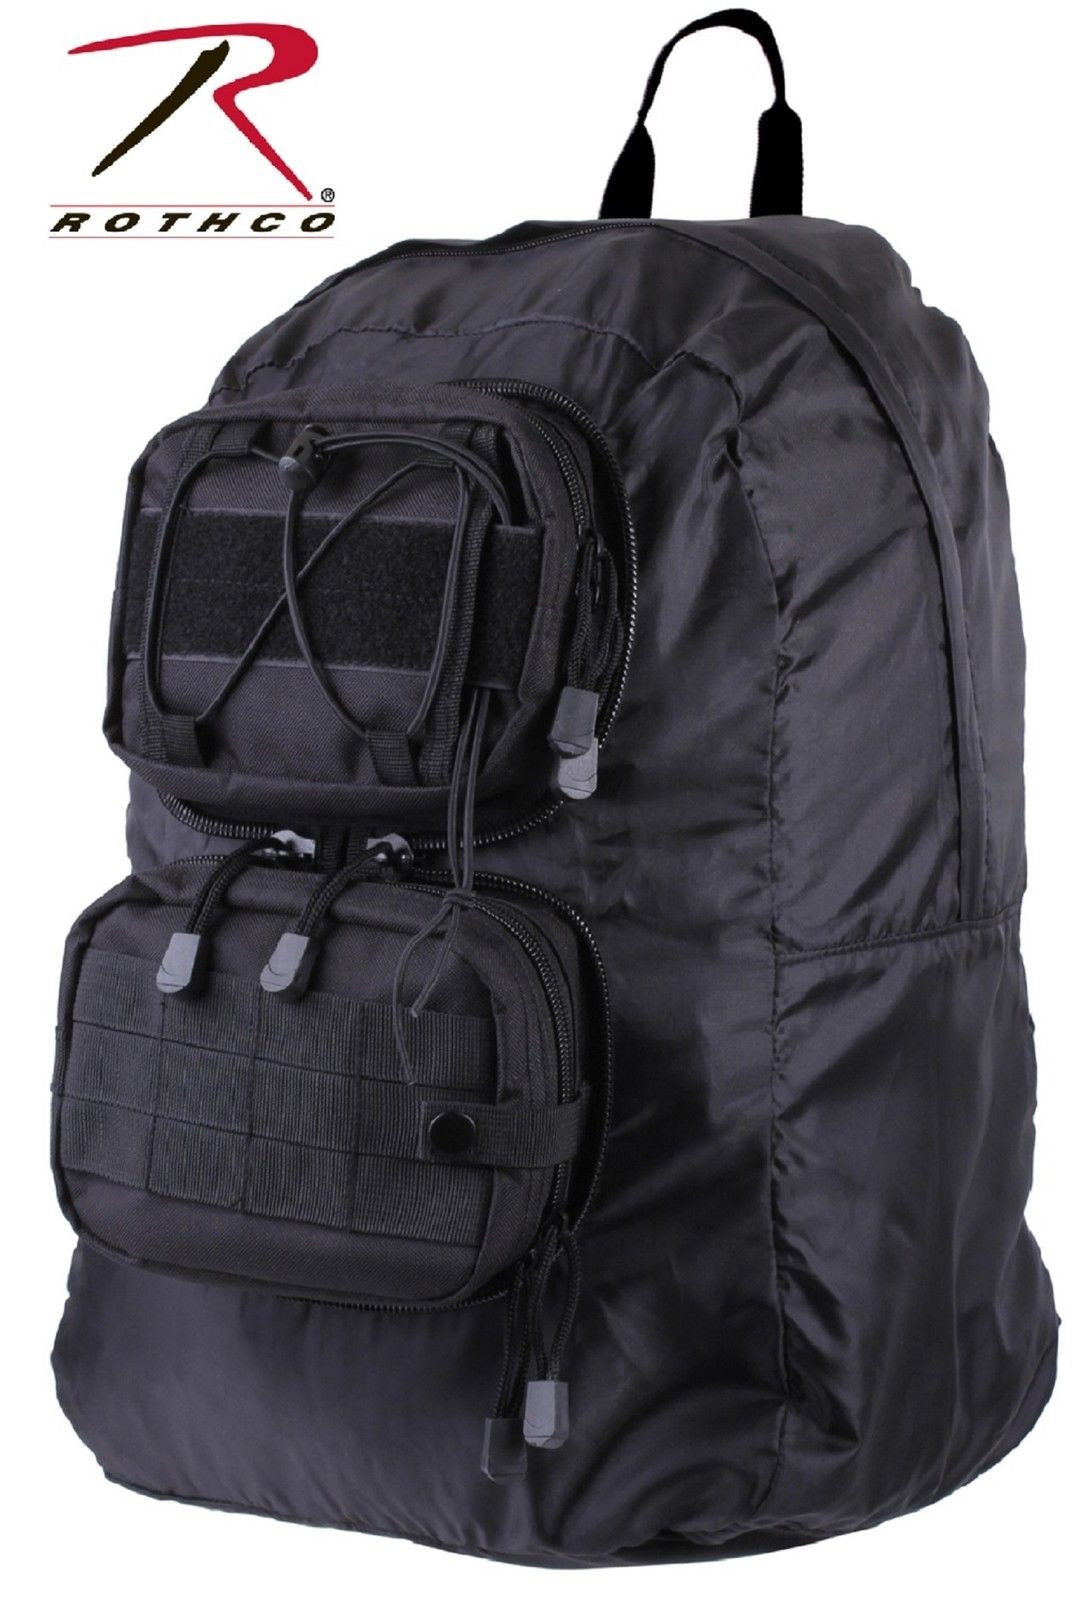 Rothco Black Tactical Foldable Backpack - 18" Customizable MOLLE Bag Pack 27710